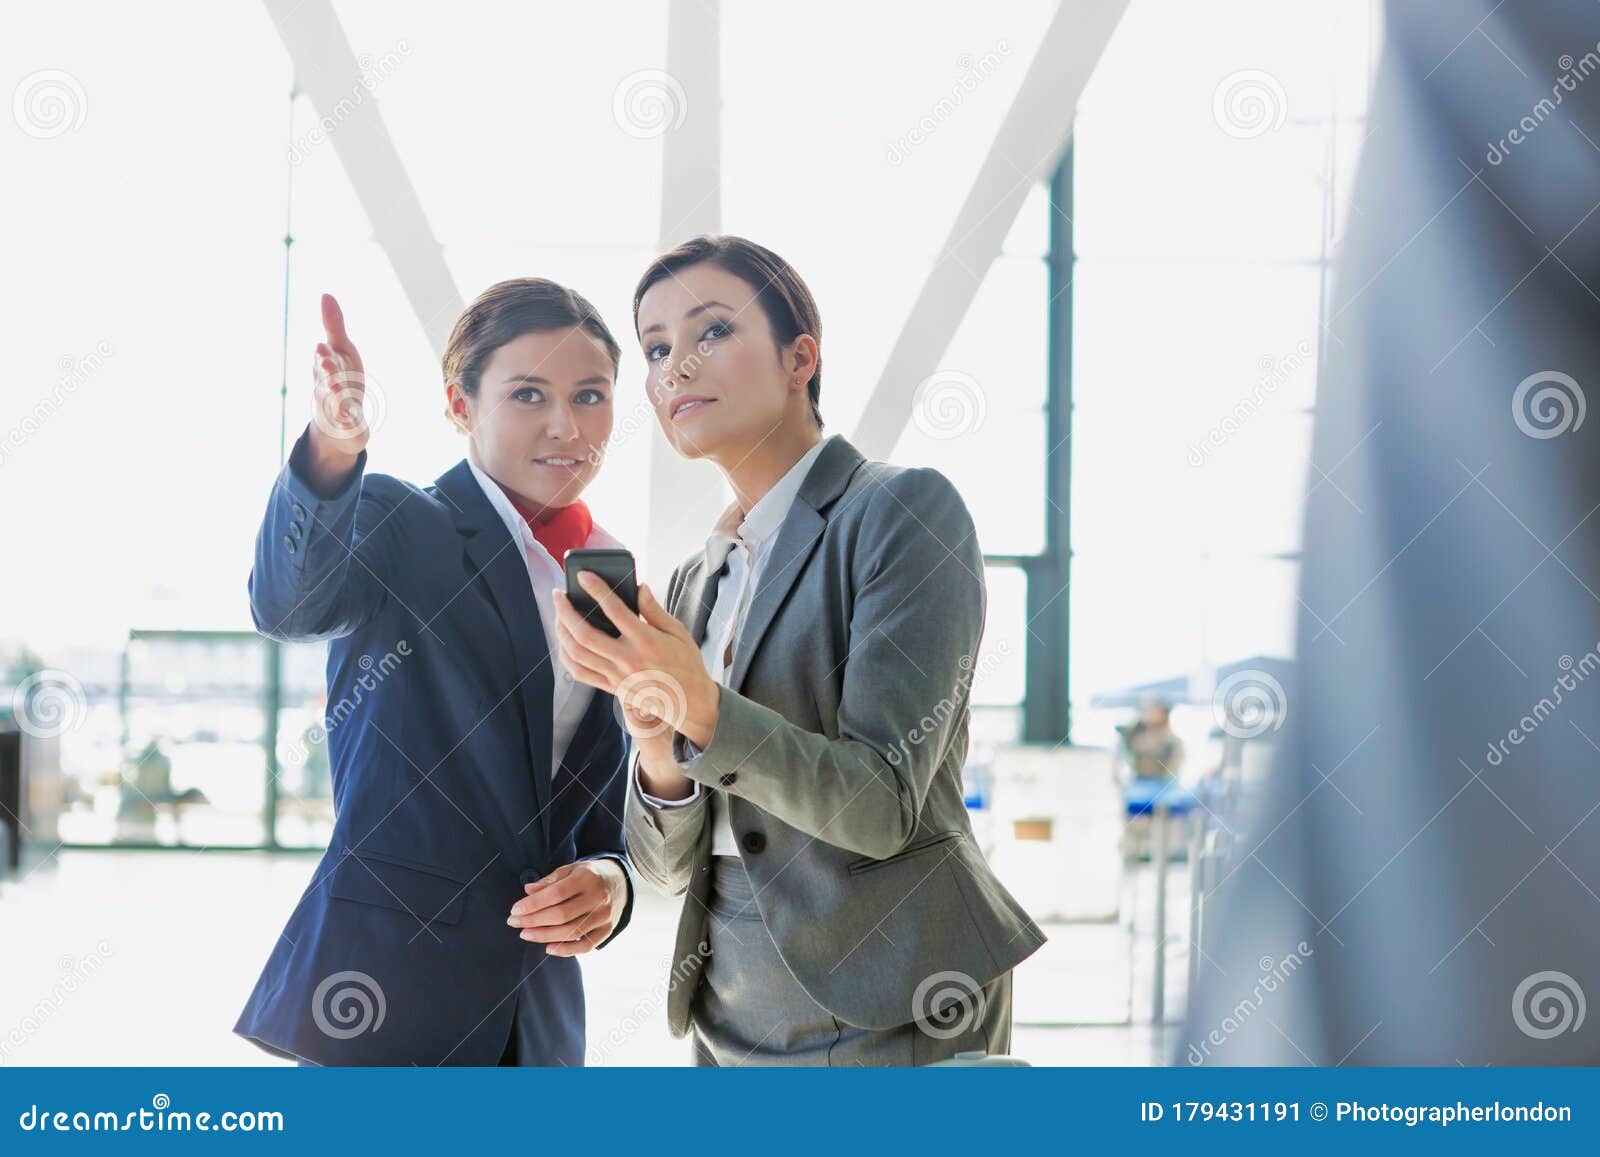 passenger service agent assisting and giving directions with businesswoman in airport